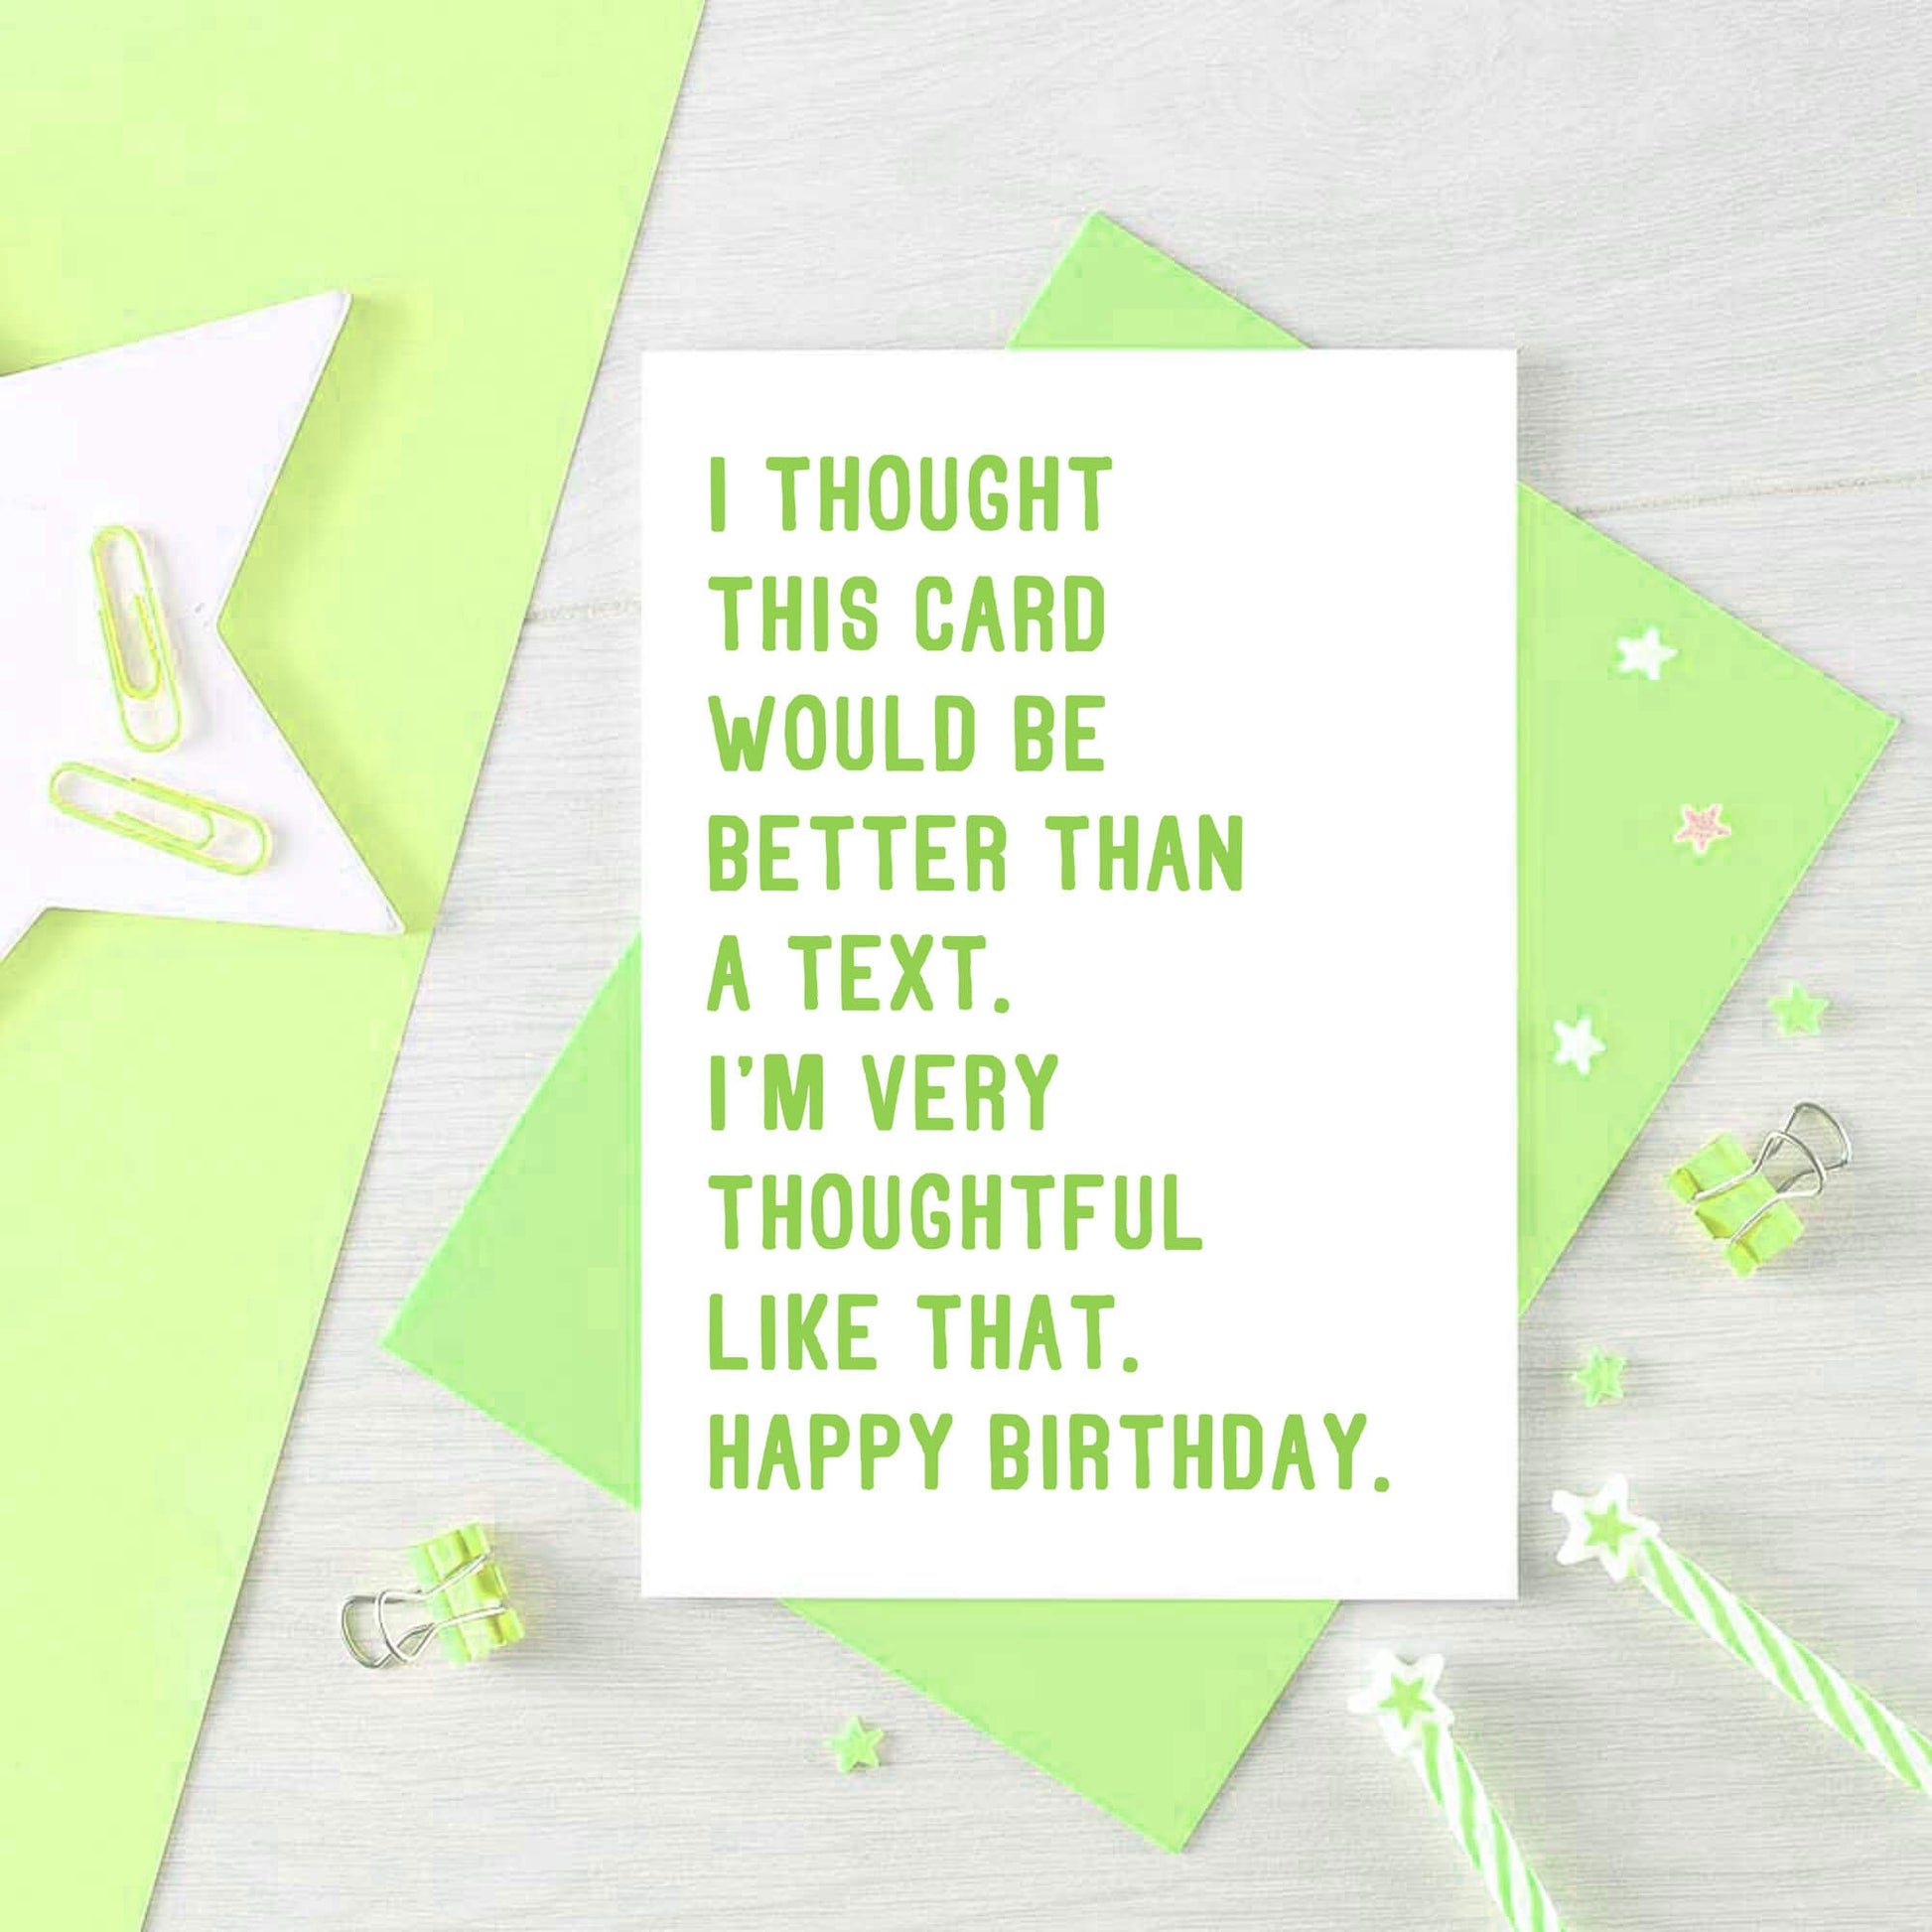 Birthday Card by SixElevenCreations. Reads I thought this card would be better than a text. I'm very thoughtful like that. Happy birthday. Product Code SE2072A6